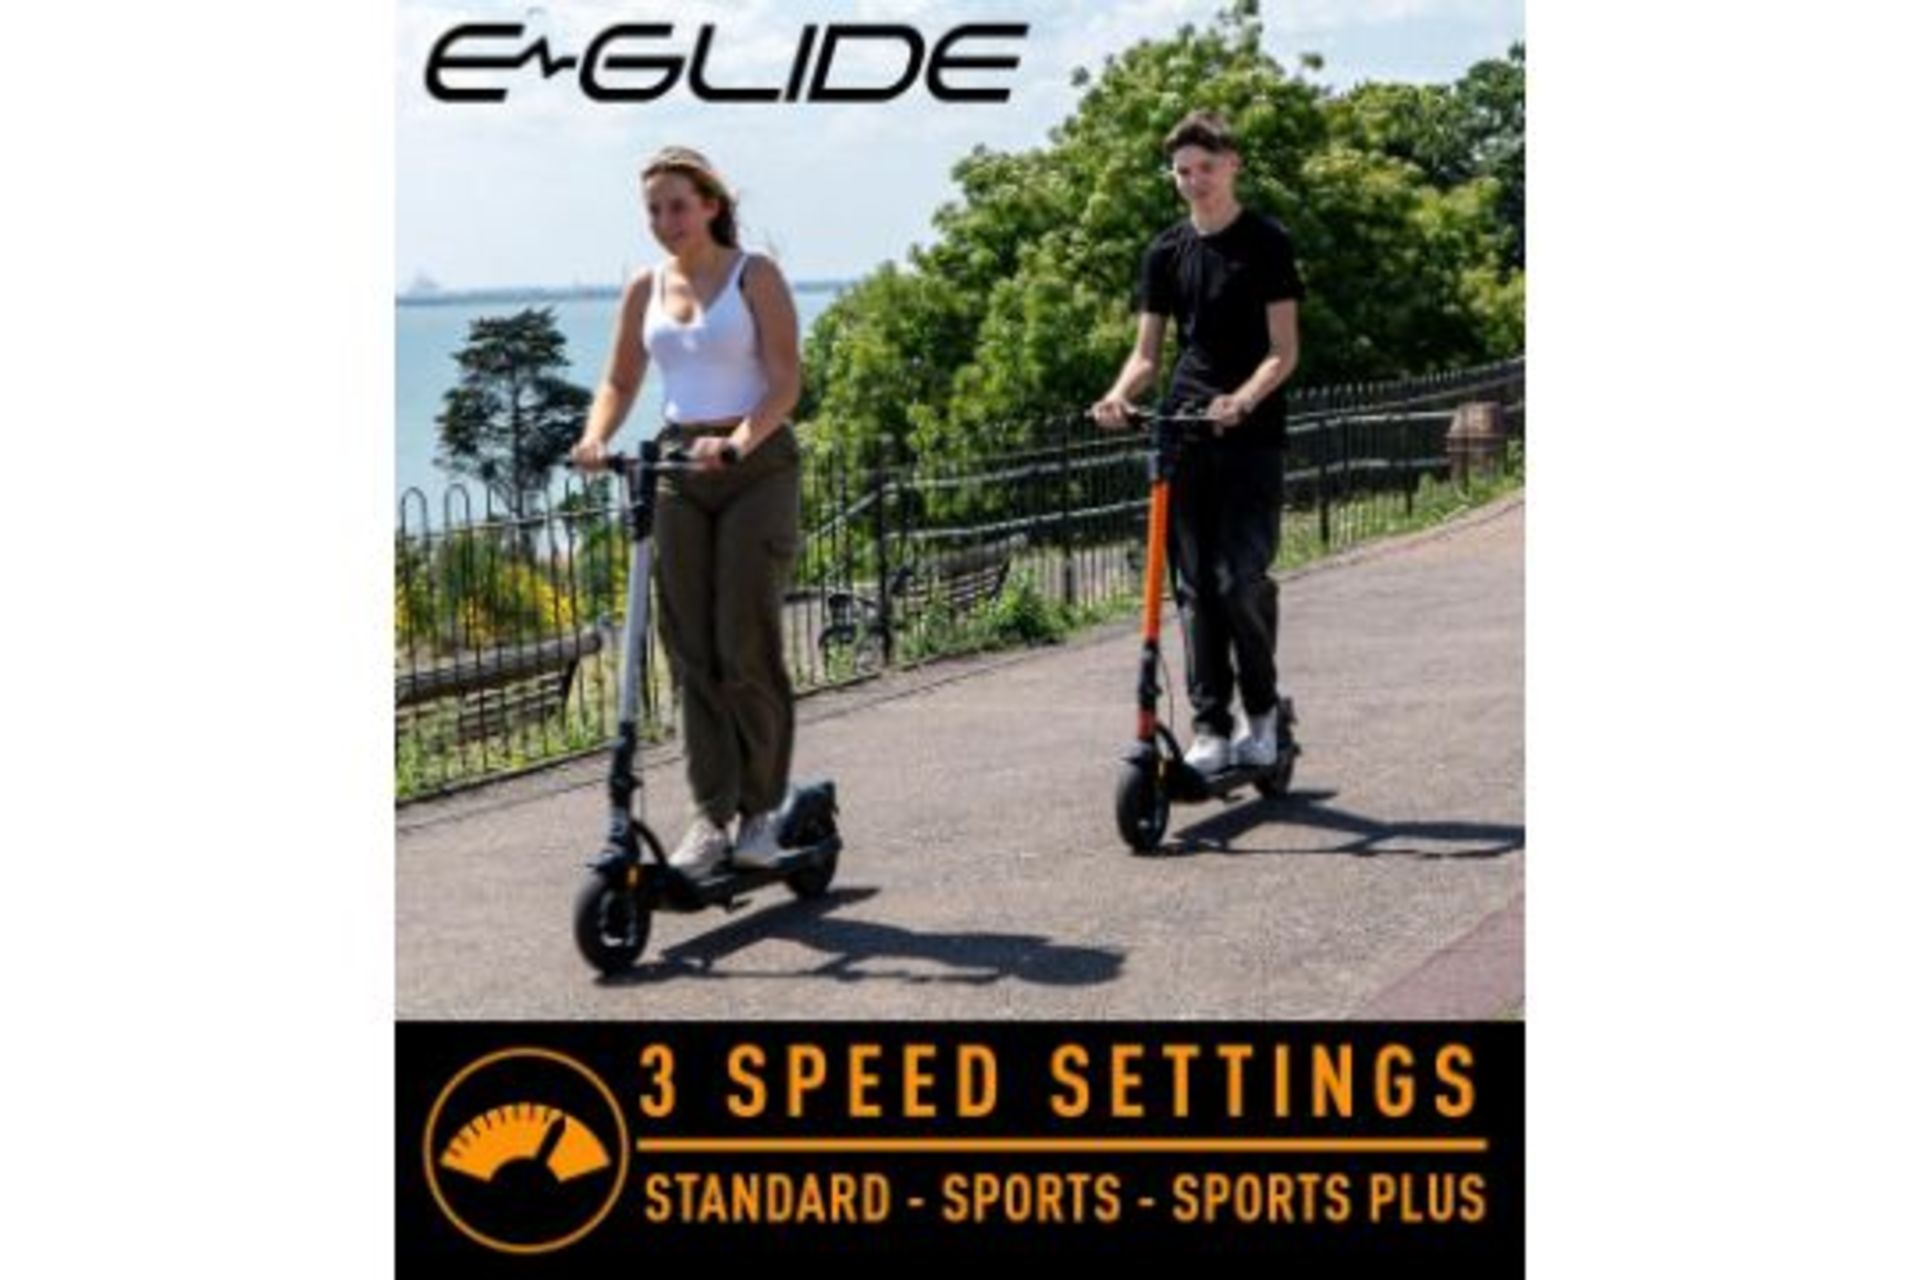 Brand New E-Glide V2 Electric Scooter Grey and Black RRP £599, Introducing a sleek and efficient - Image 5 of 5